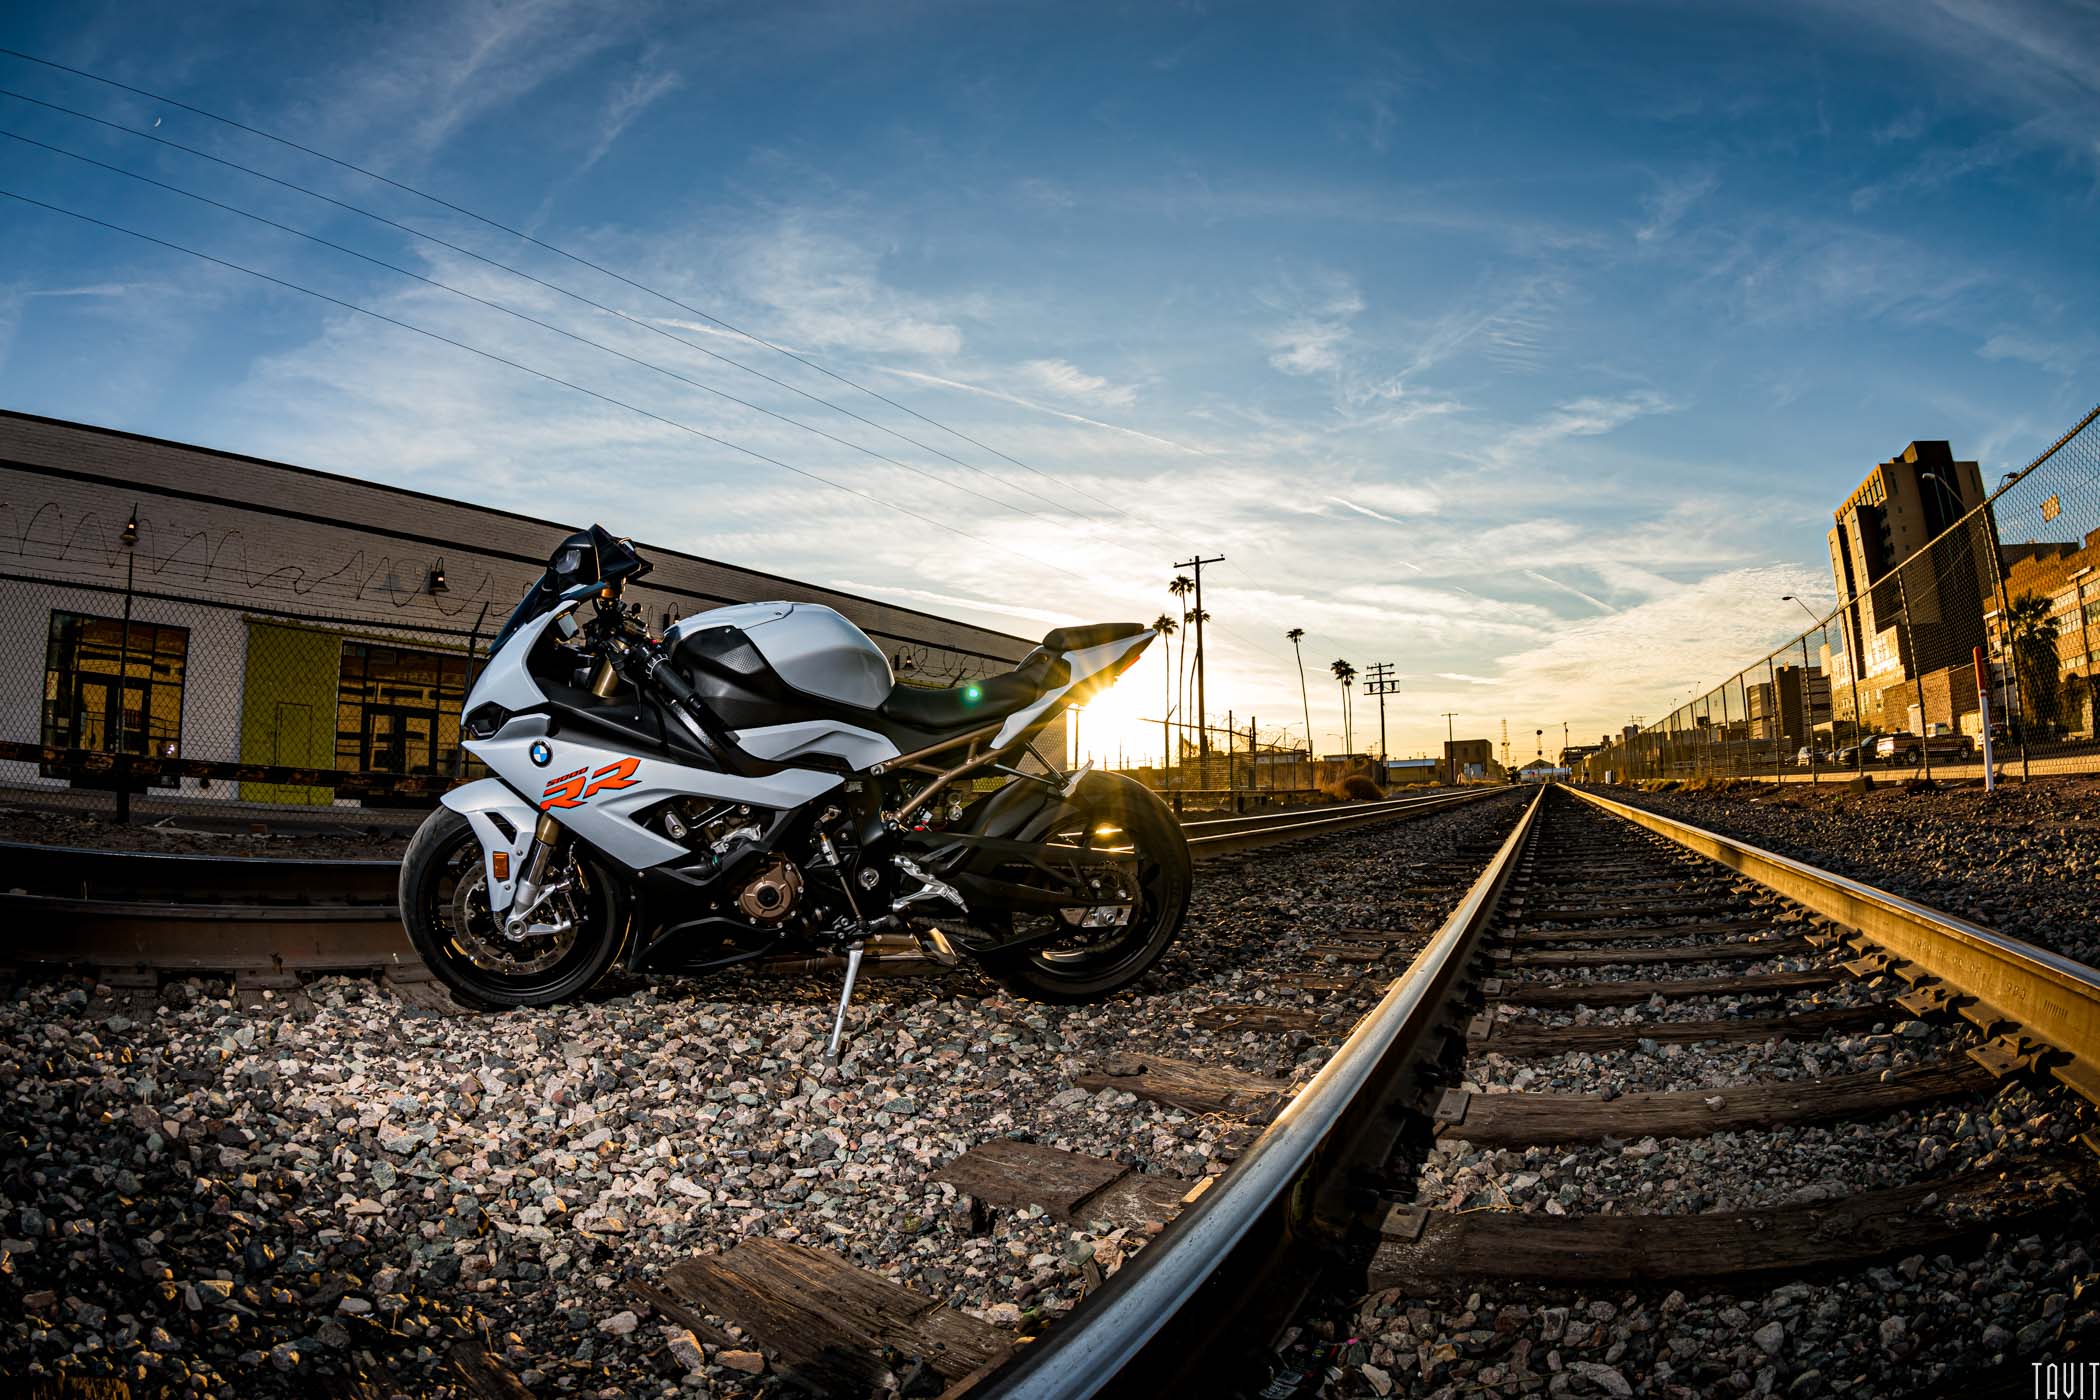 Artistic shot of BMW S 1000 RR motorcycle